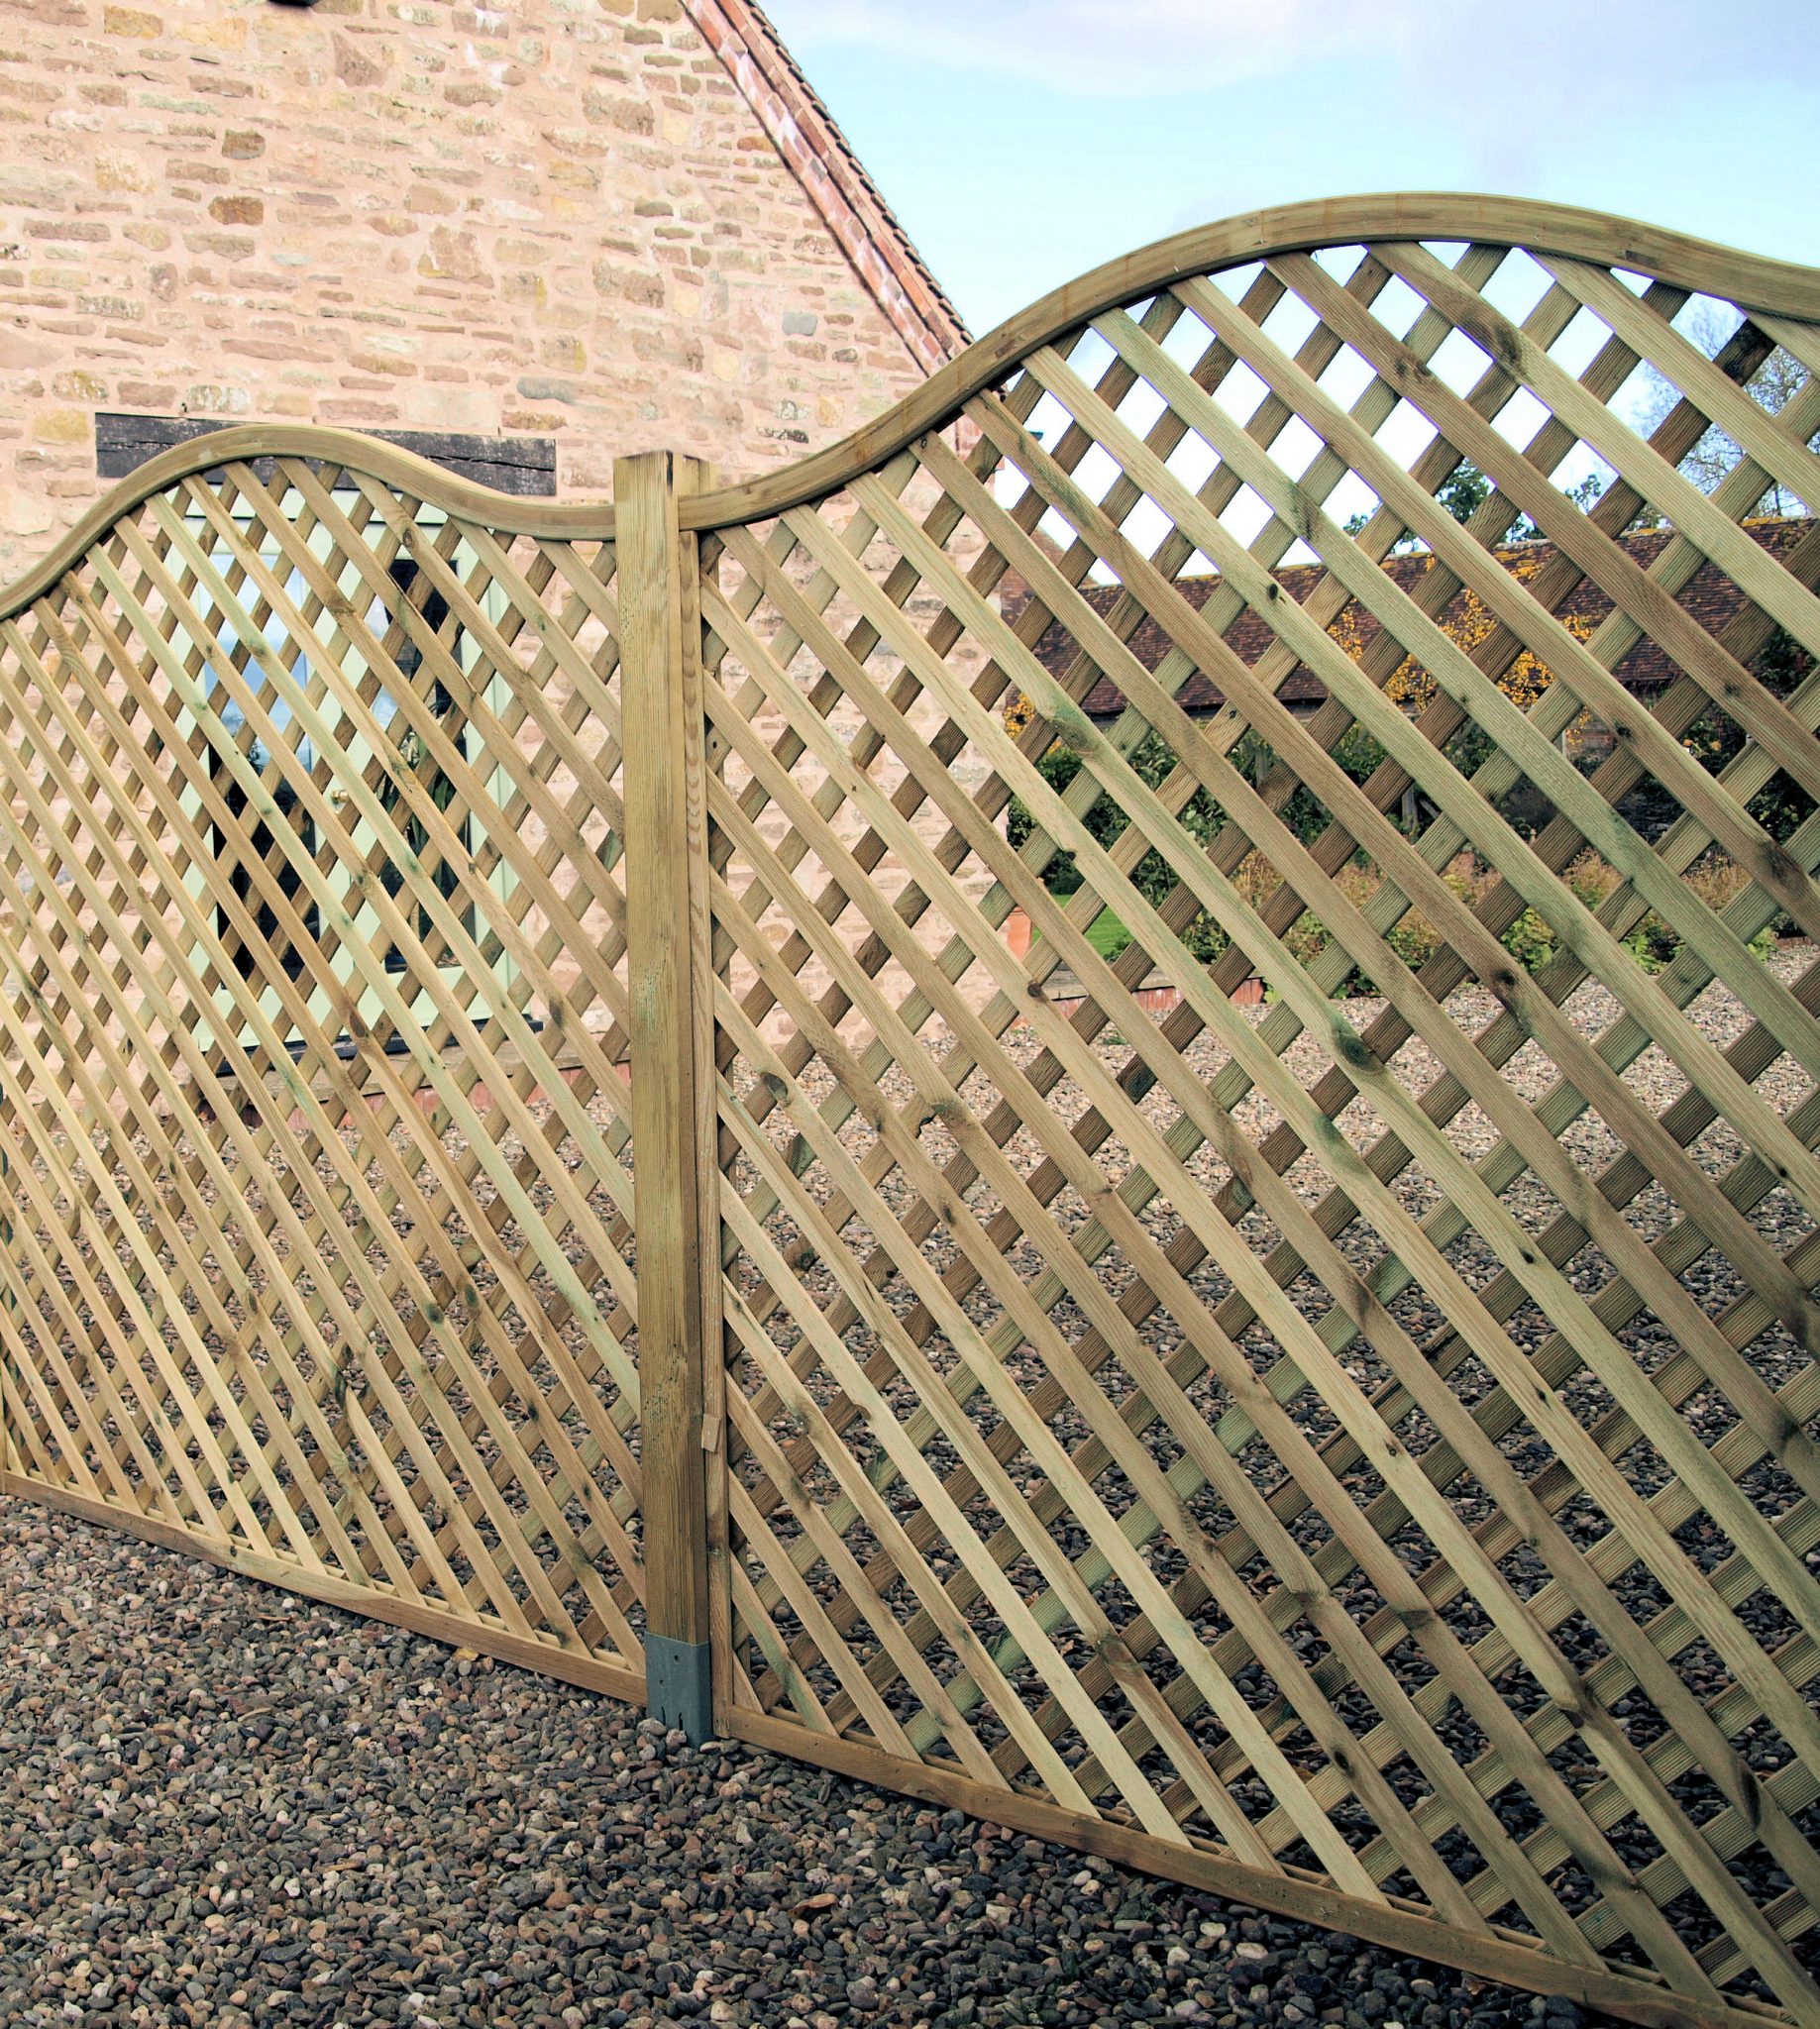 The trellis is planed, chamfered and grooved providing a beautiful decorative finish, it will fit in with many styles of gardens allowing you to use your imagination. Fitted into a sturdy 40mm rebated frame. The trellis is planed, chamfered and grooved providing a beautiful decorative finish. With a 44mm lattice gap throughout, the timber is pressure-treated ensuring protection against wood rot and fungal decay.